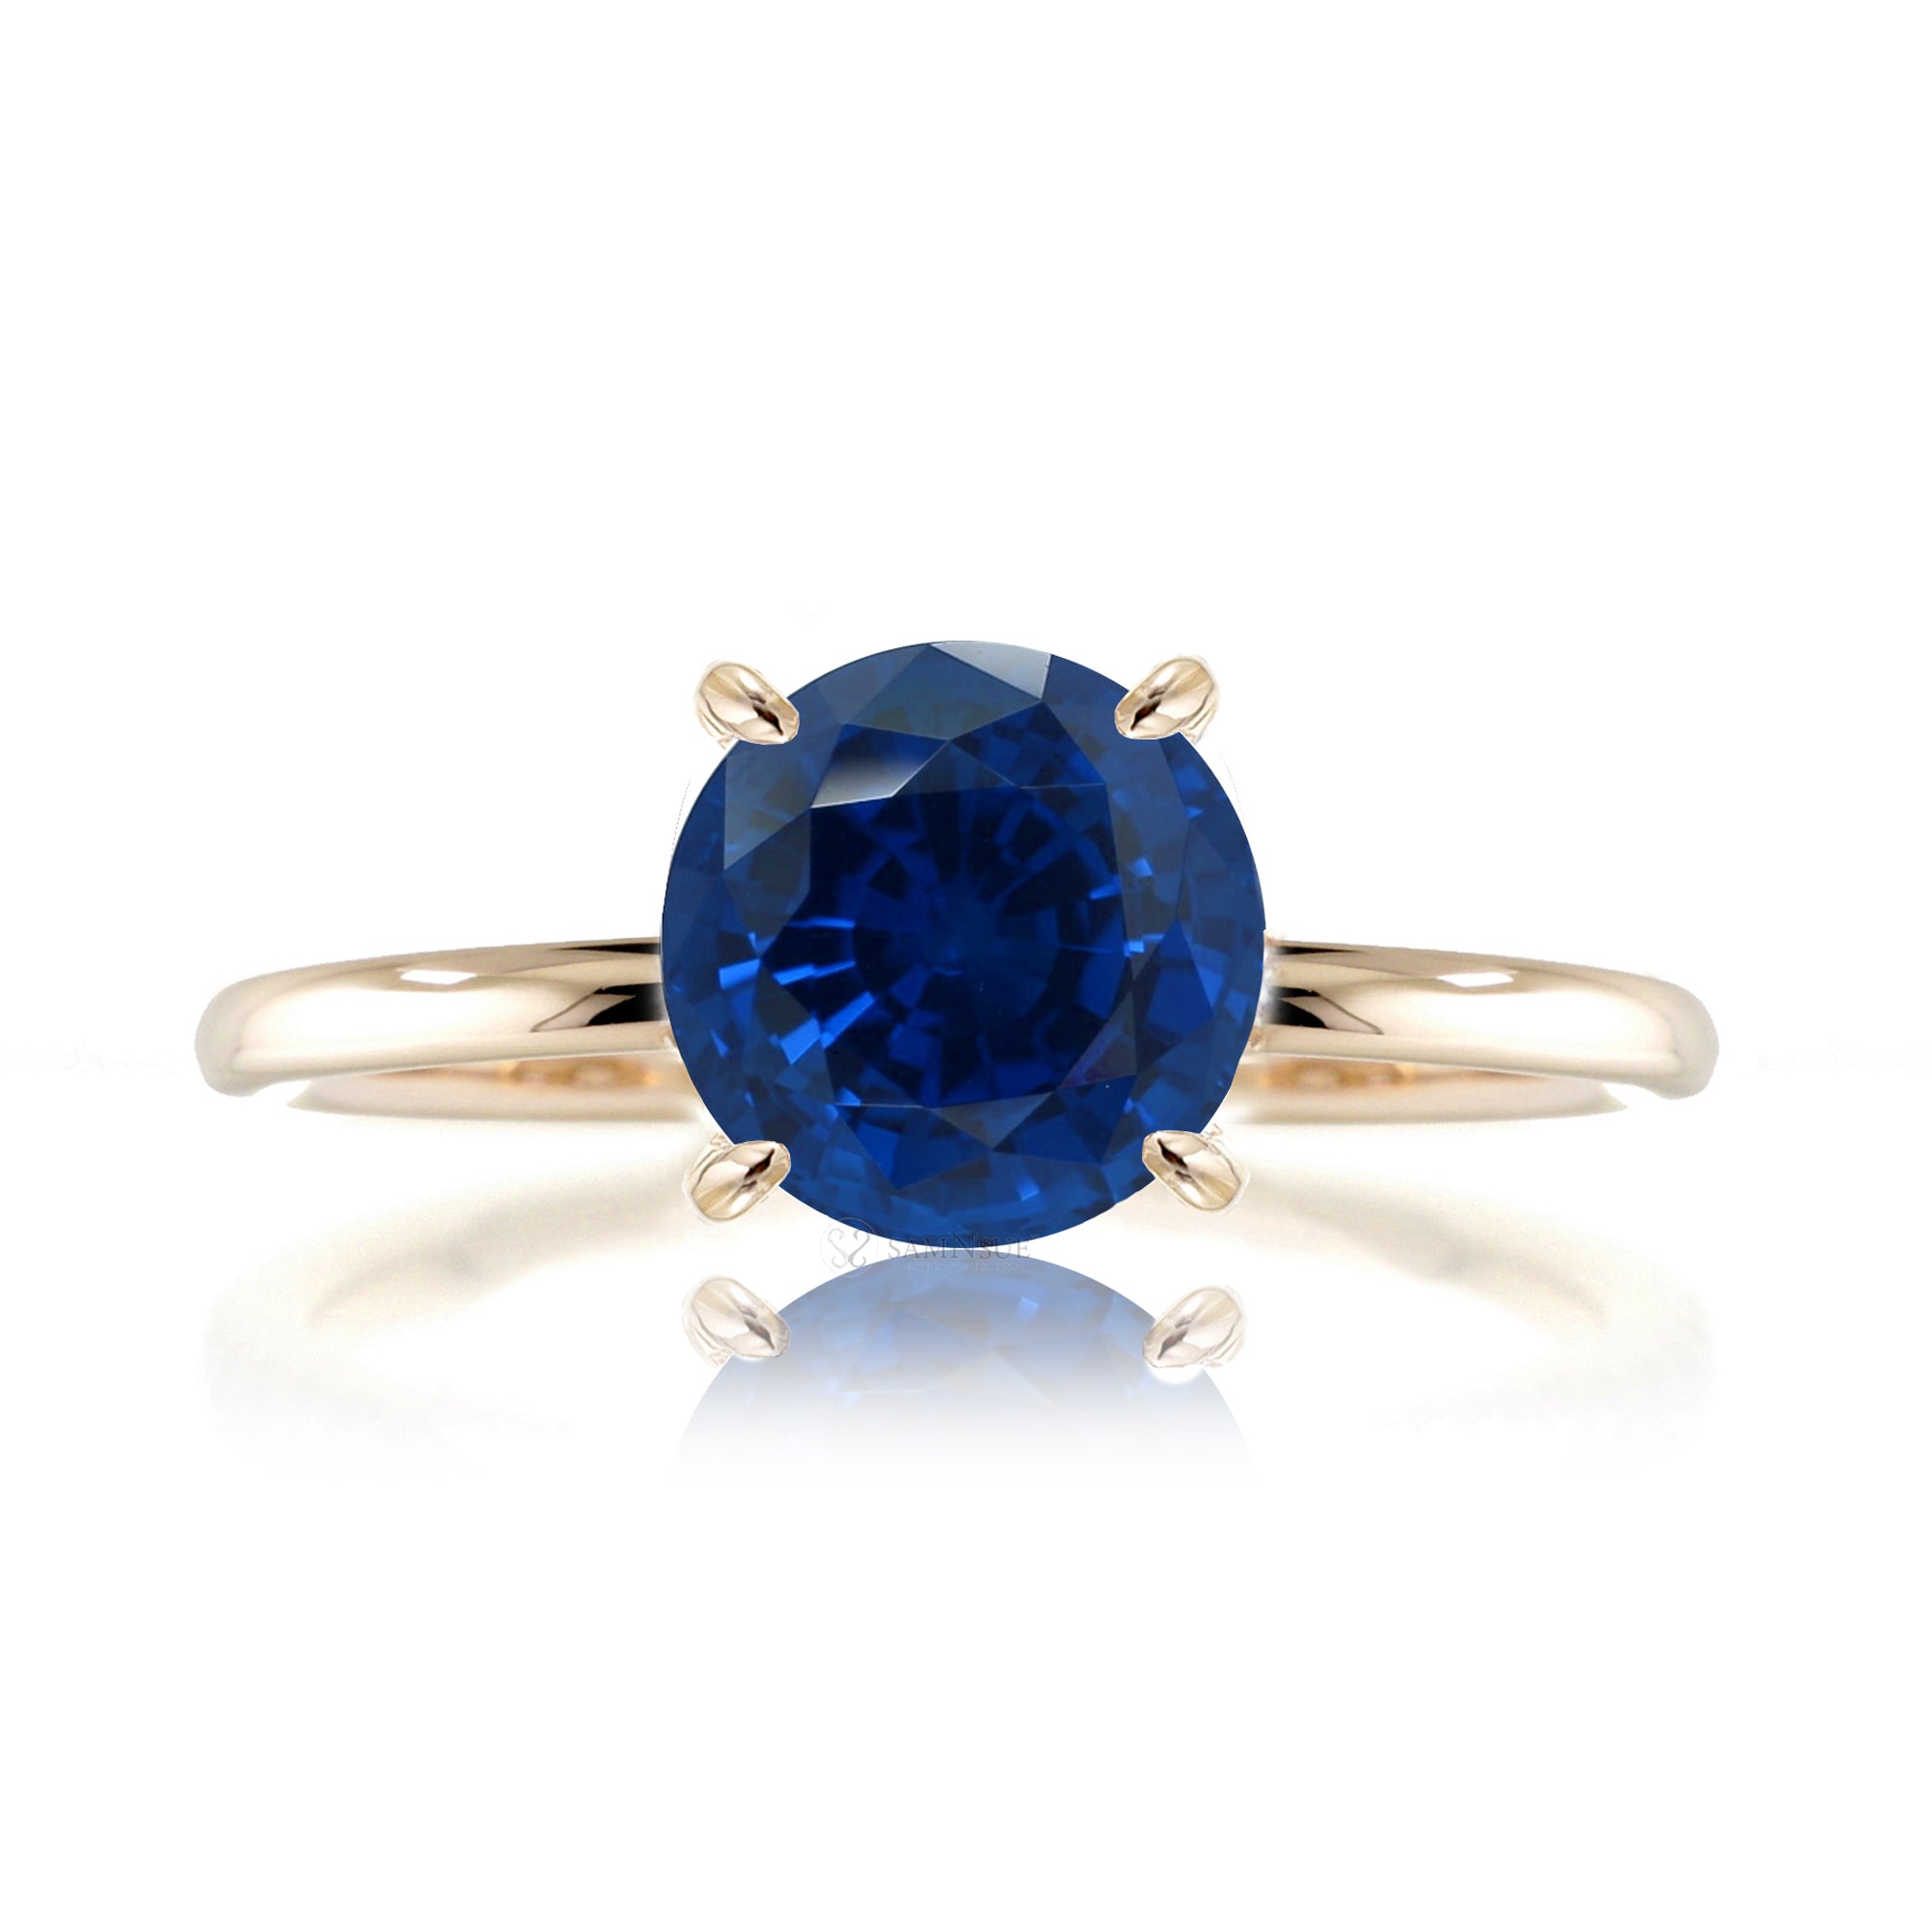 Round blue sapphire solid band engagement ring yellow gold - the Ava